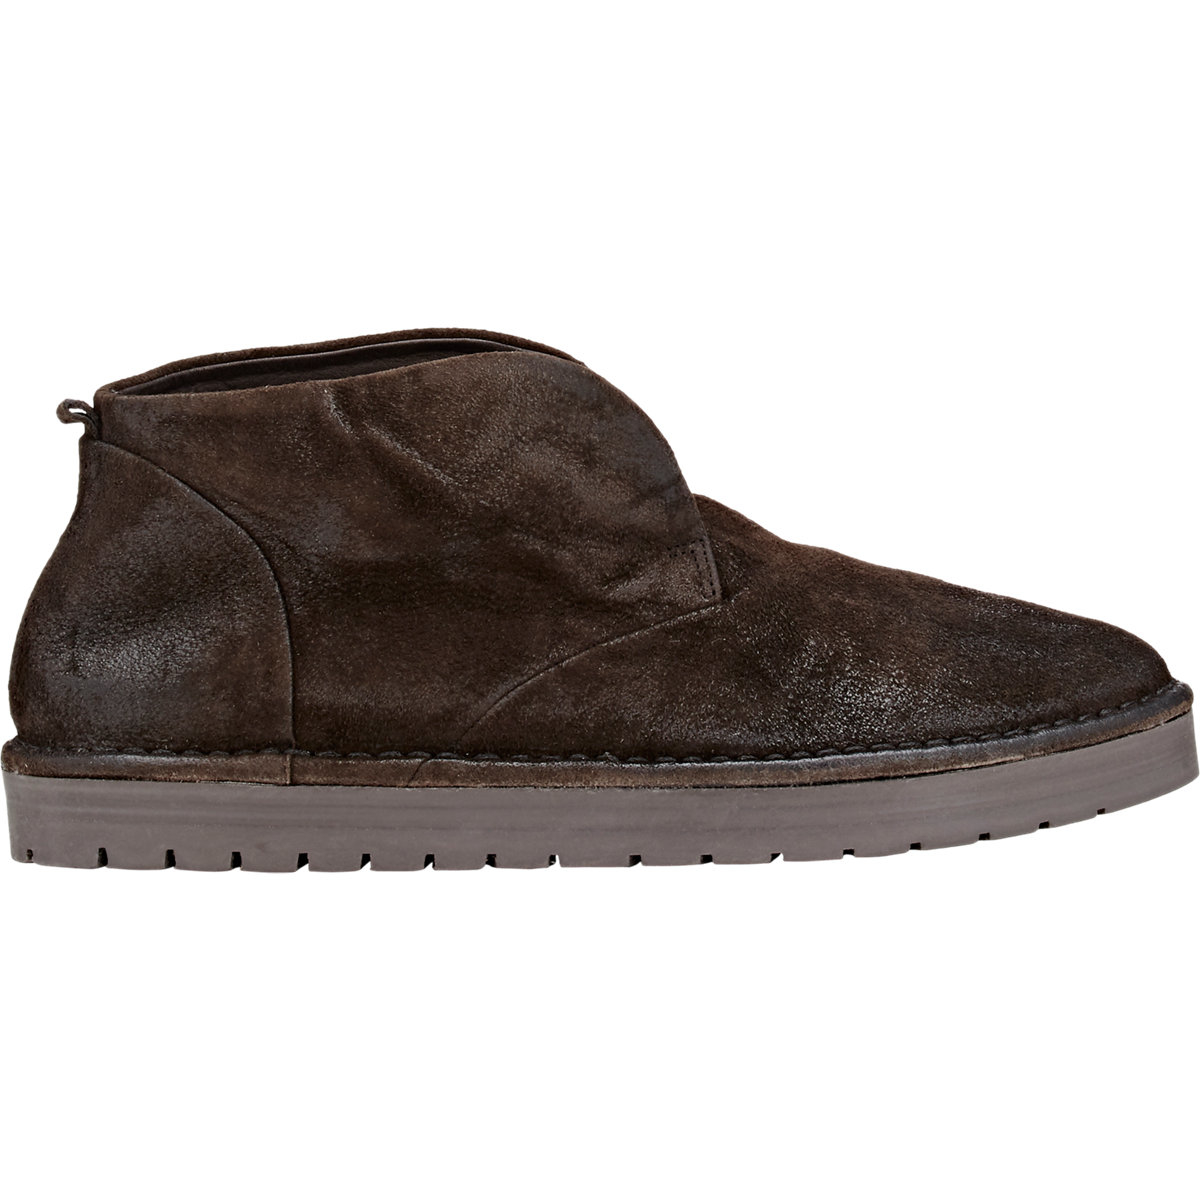 Lyst - Marsèll Suede Laceless Chukka Boots in Brown for Men